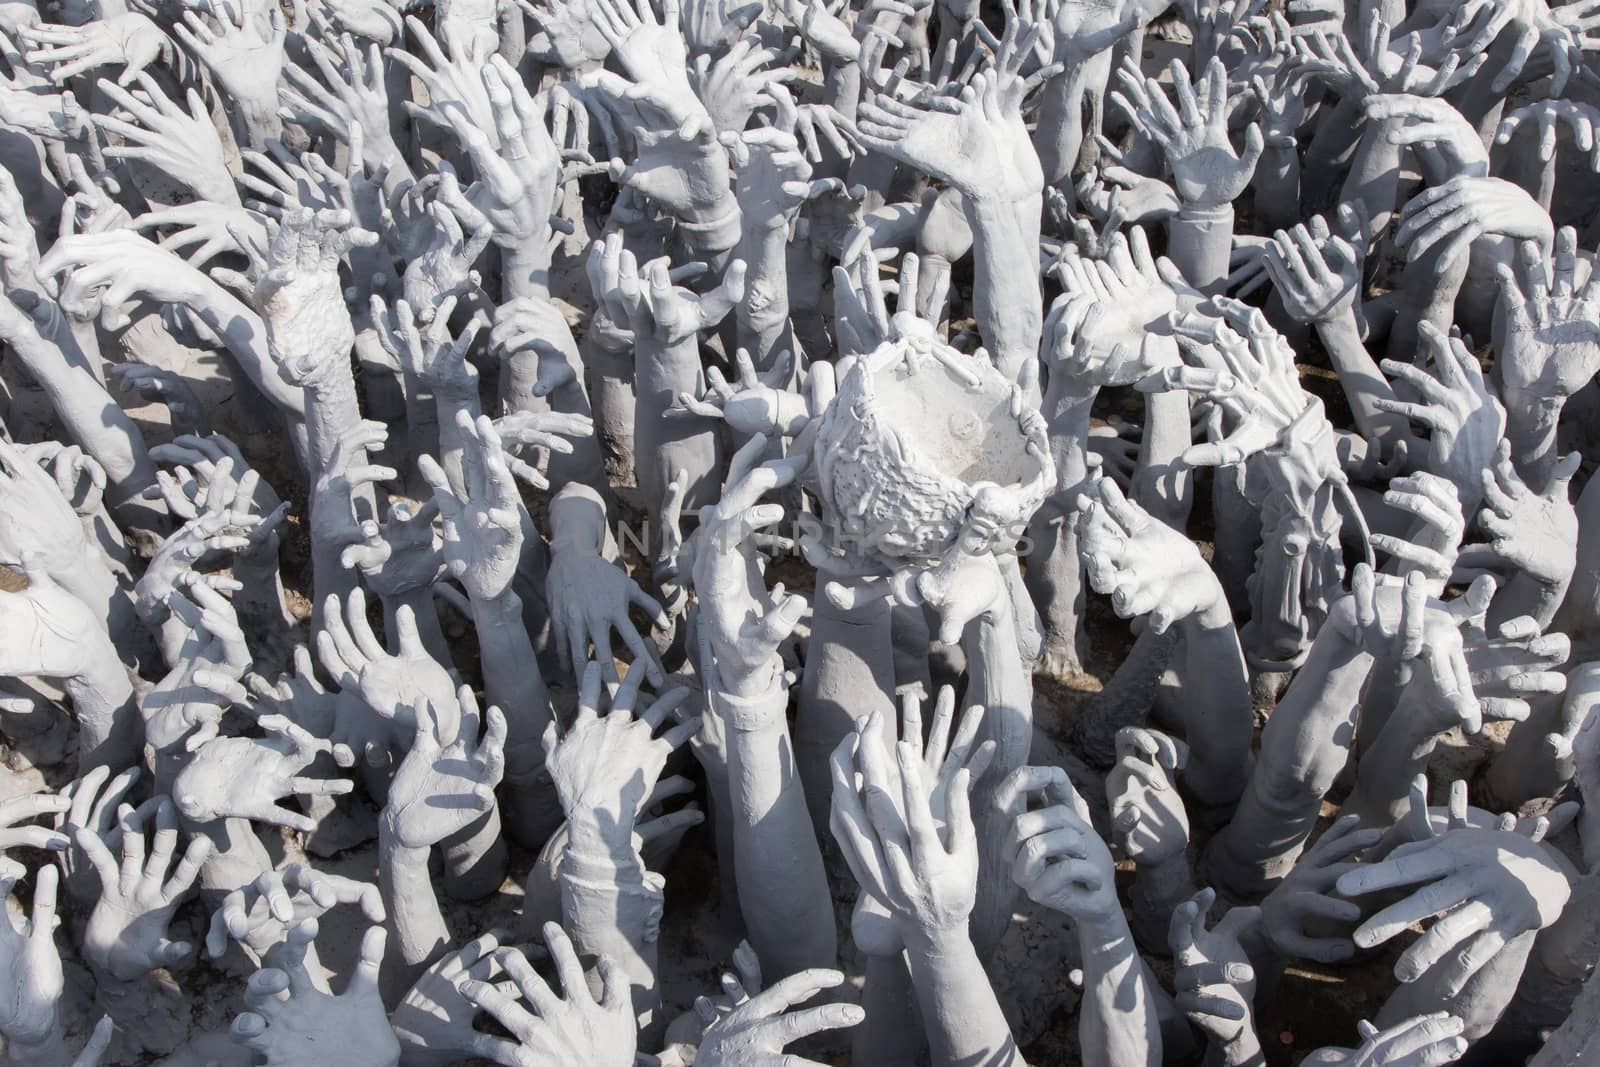 Wat Rong Khun Chiang Mai Thailand 12.10.2015 White Temple with hands from hell by kgboxford